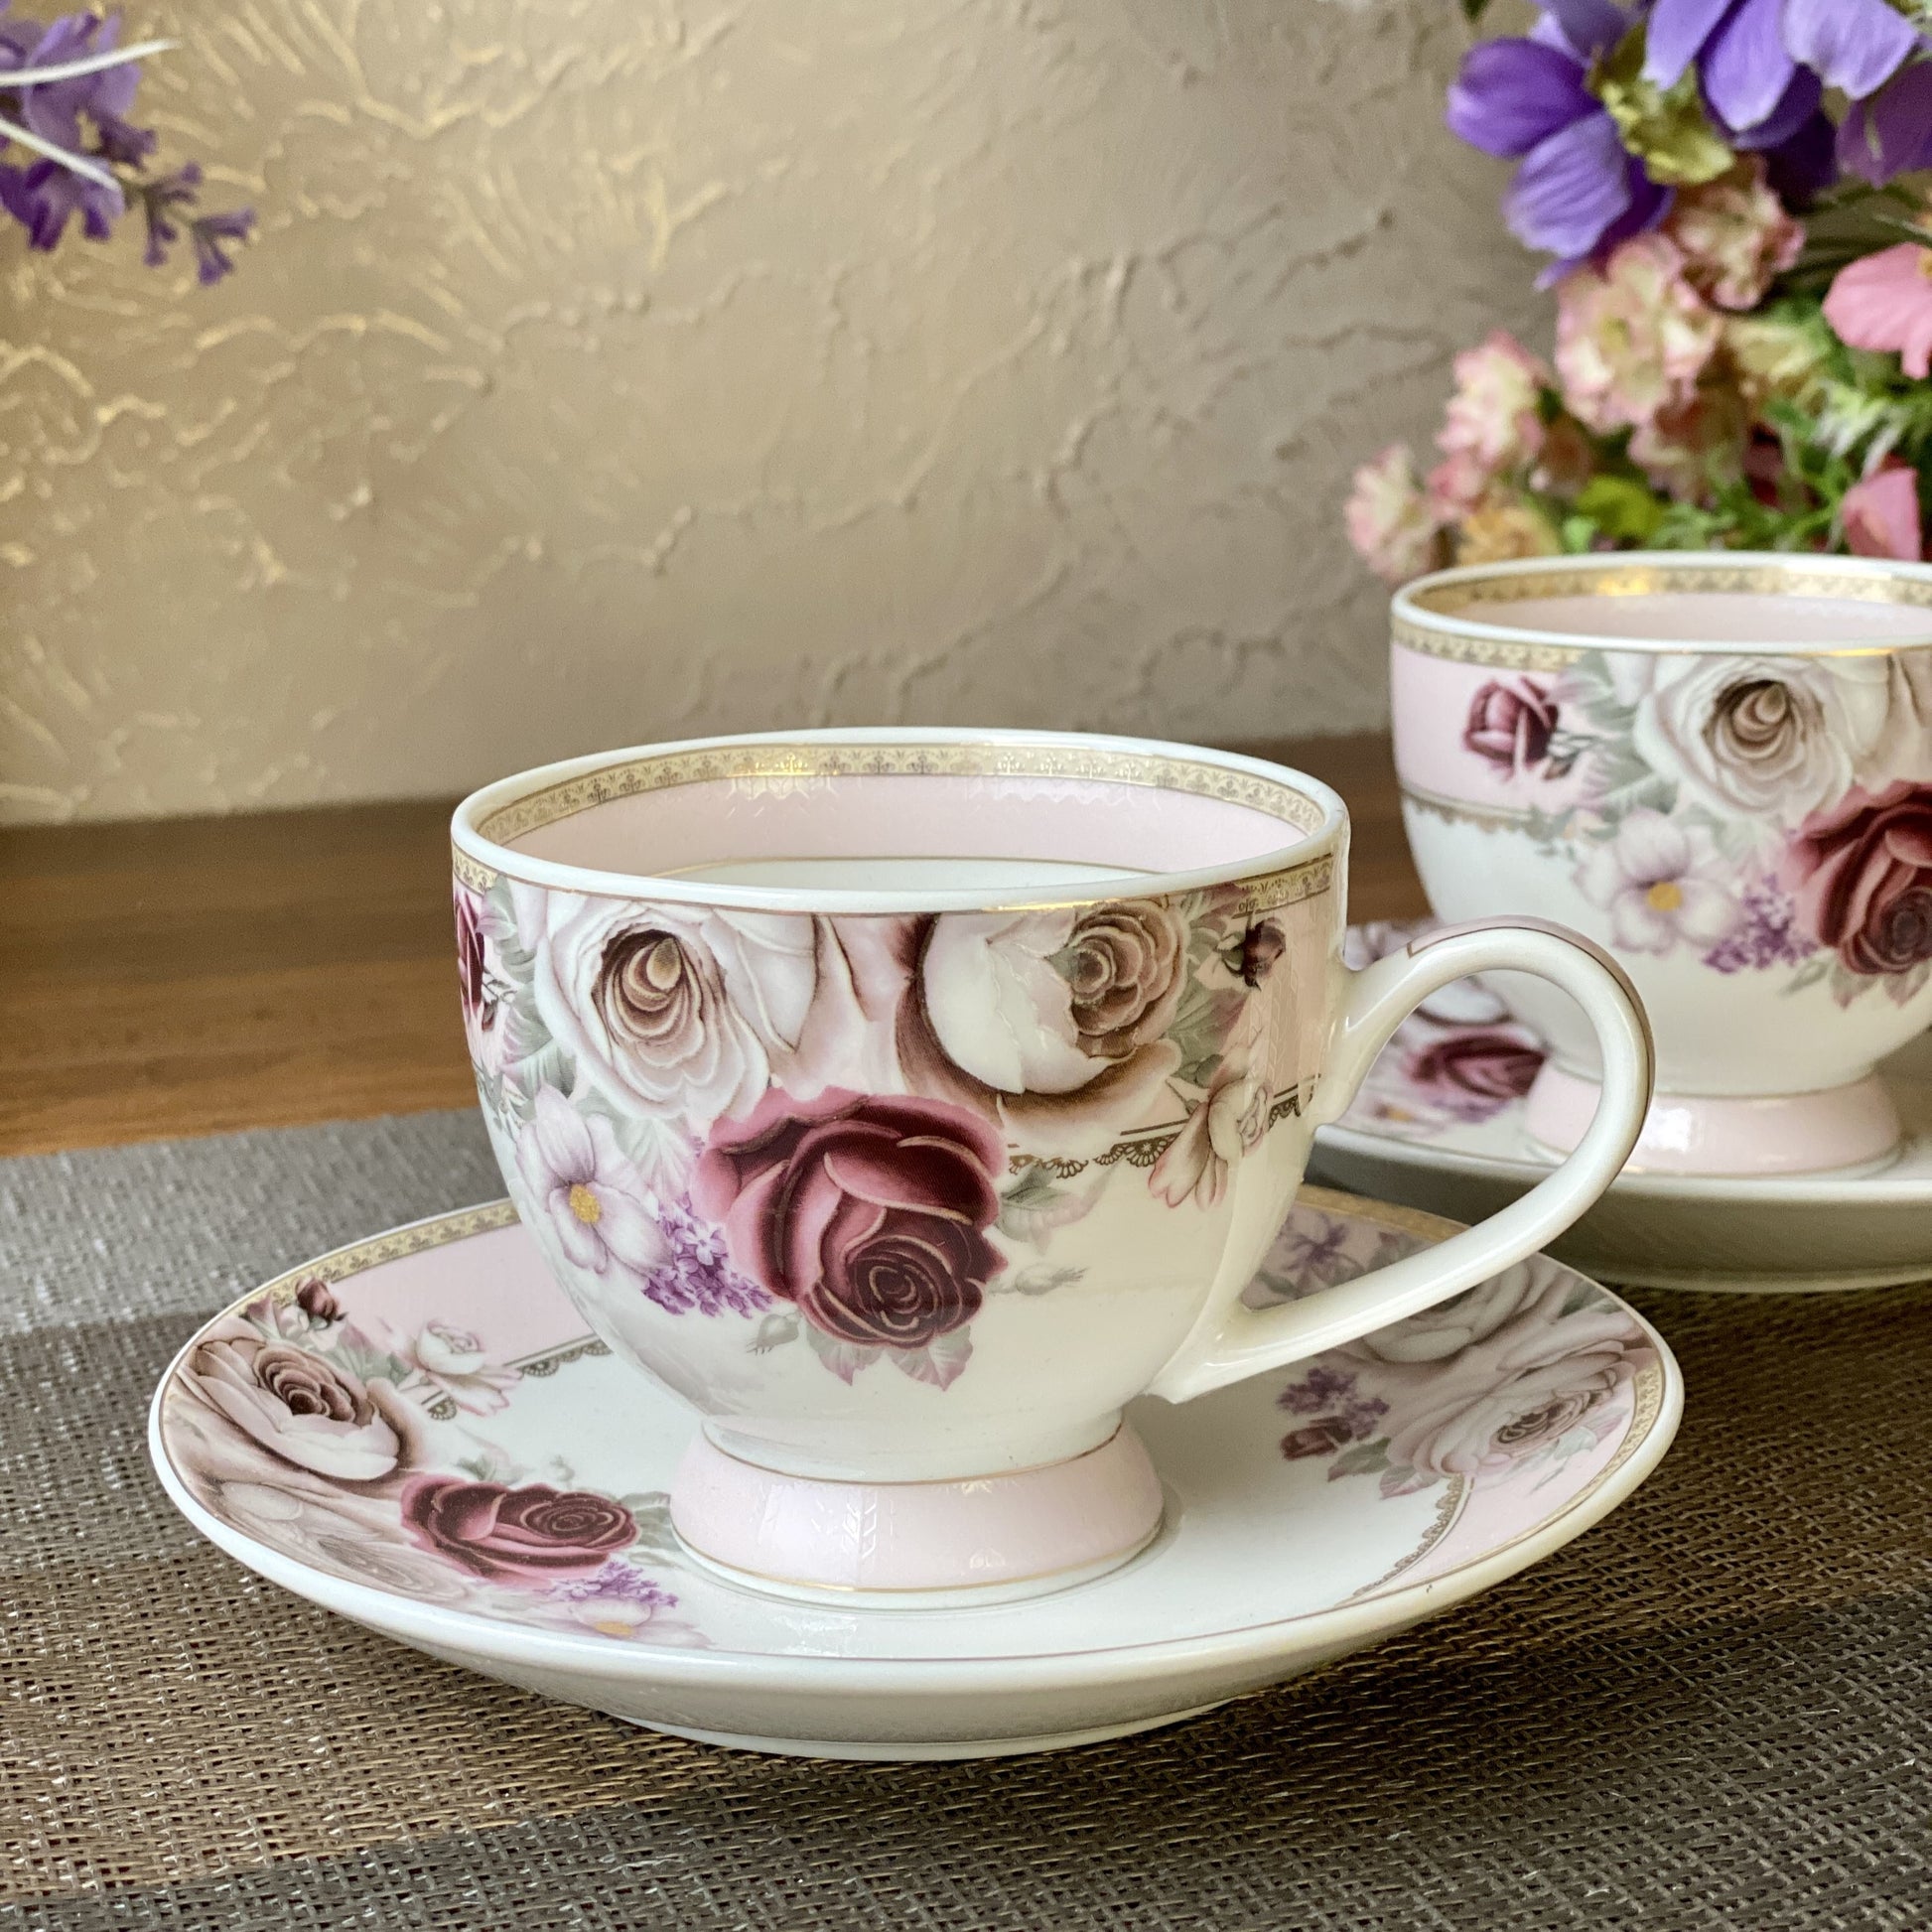 Rose Garden Cup and Saucer Set (6 Cups and 6 Saucers) - Vigneto